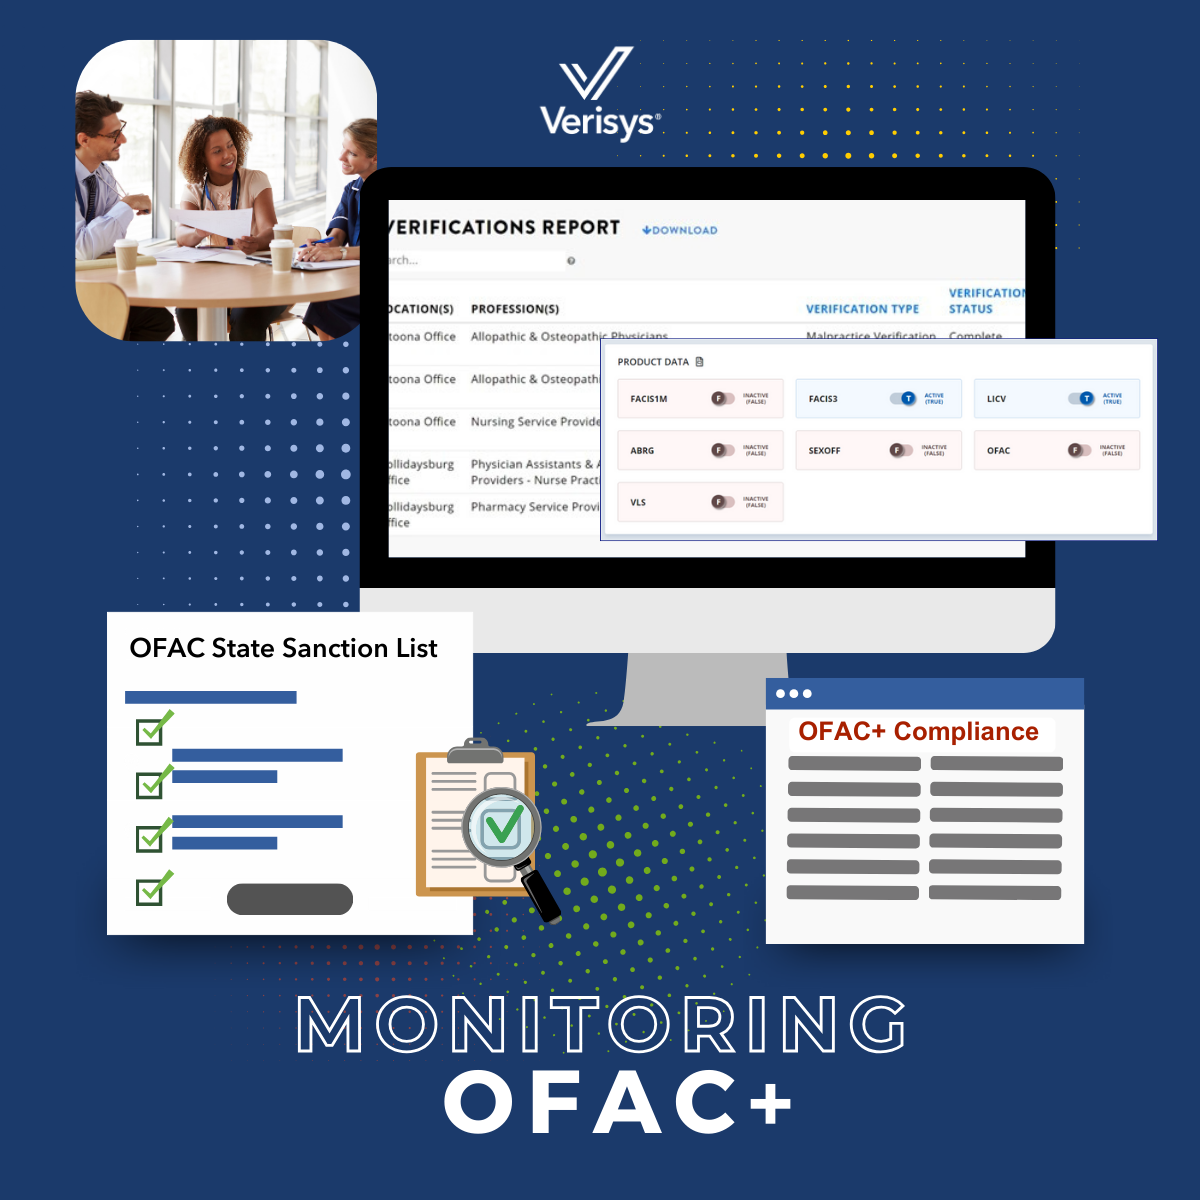 Everything You Need To Know About OFAC+ Compliance